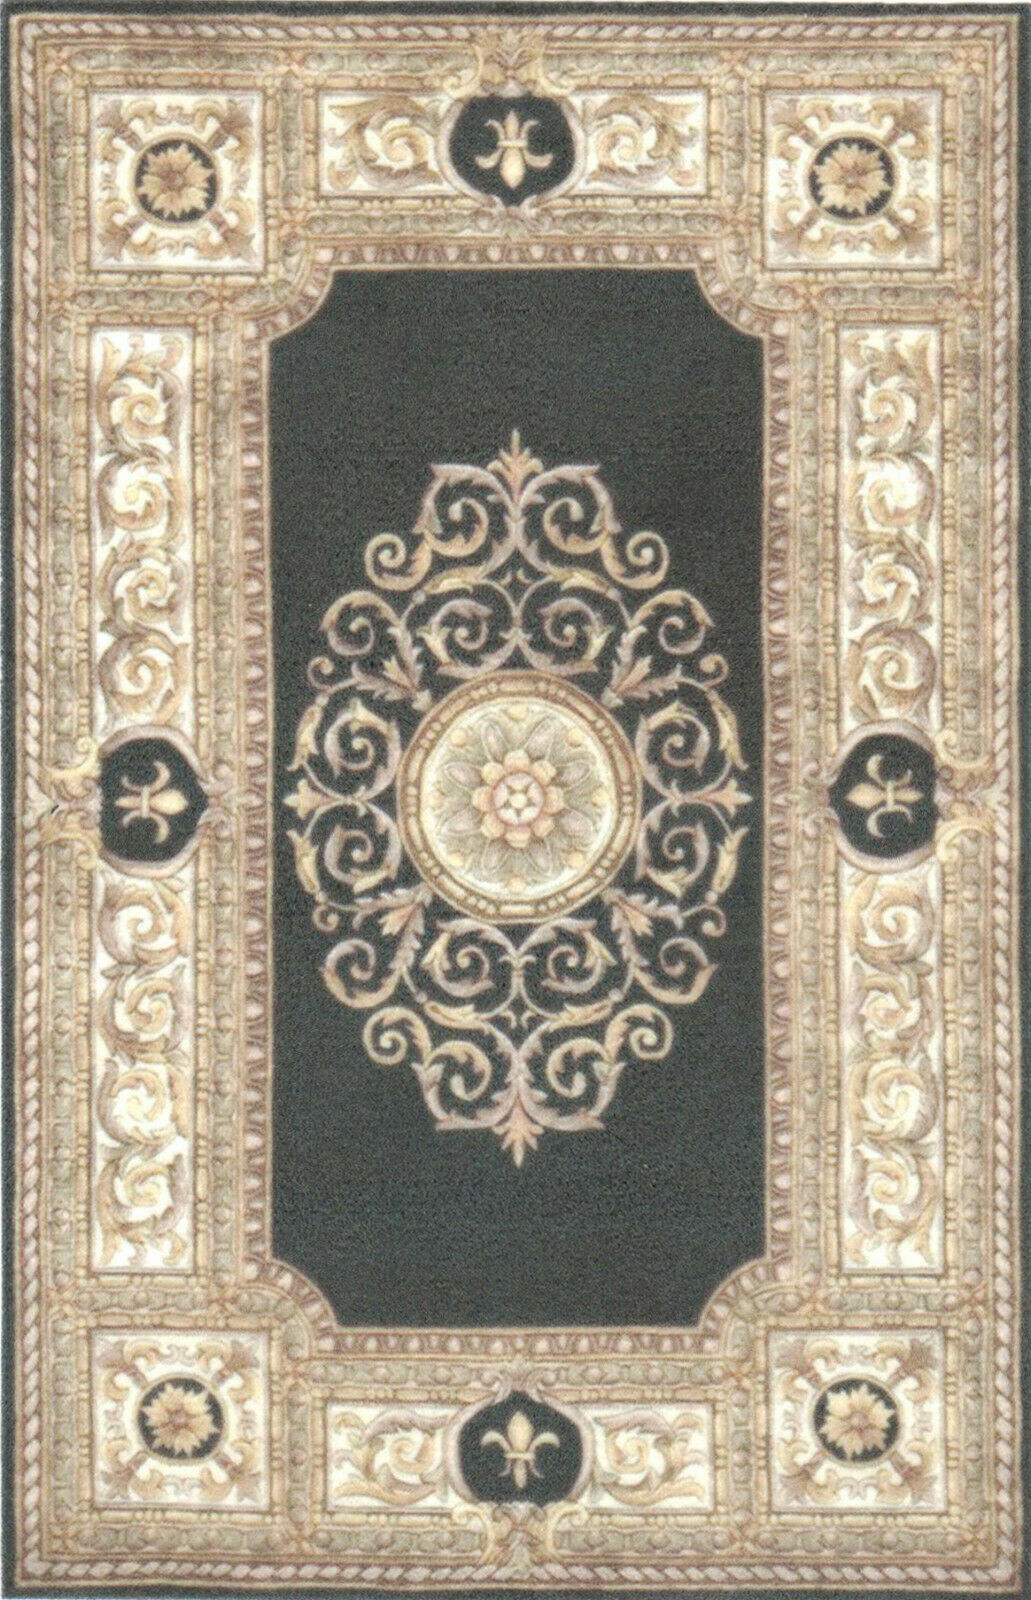 1:24 Or 1/2" Scale Dollhouse Miniature Area Rug Approx 3-7/8" X 6" - 0002708